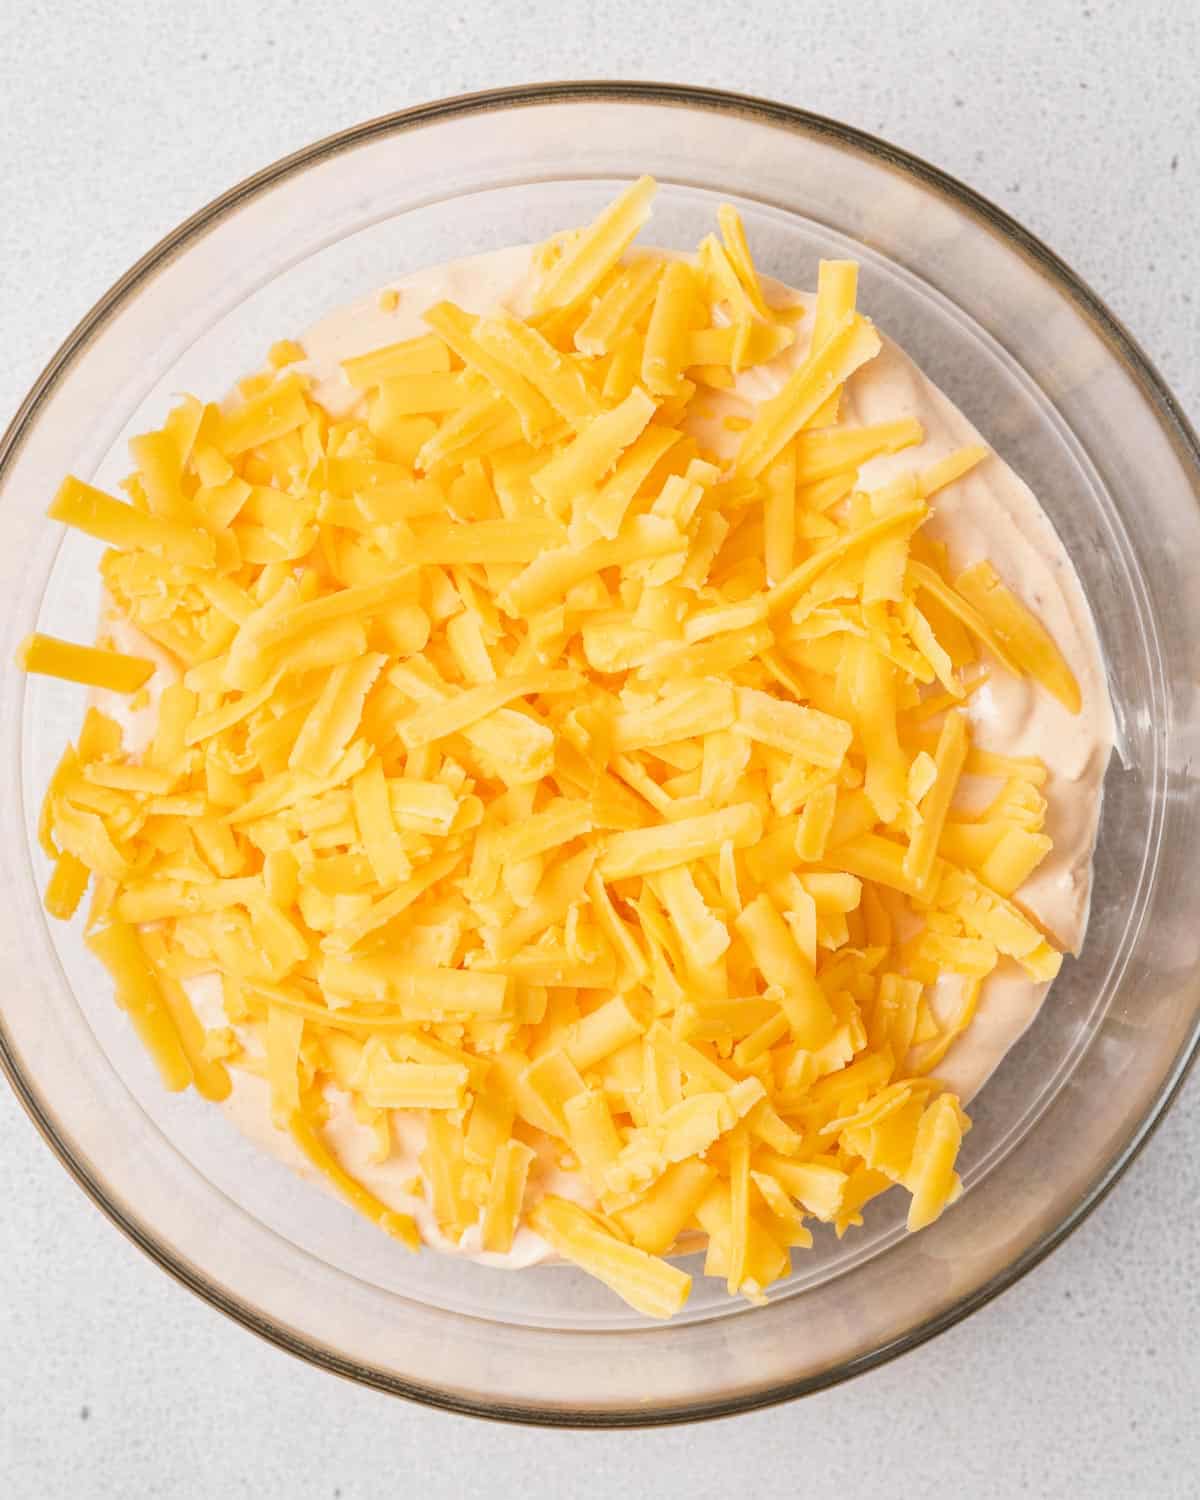 Shredded cheese on top of blended cottage cheese in a bowl.